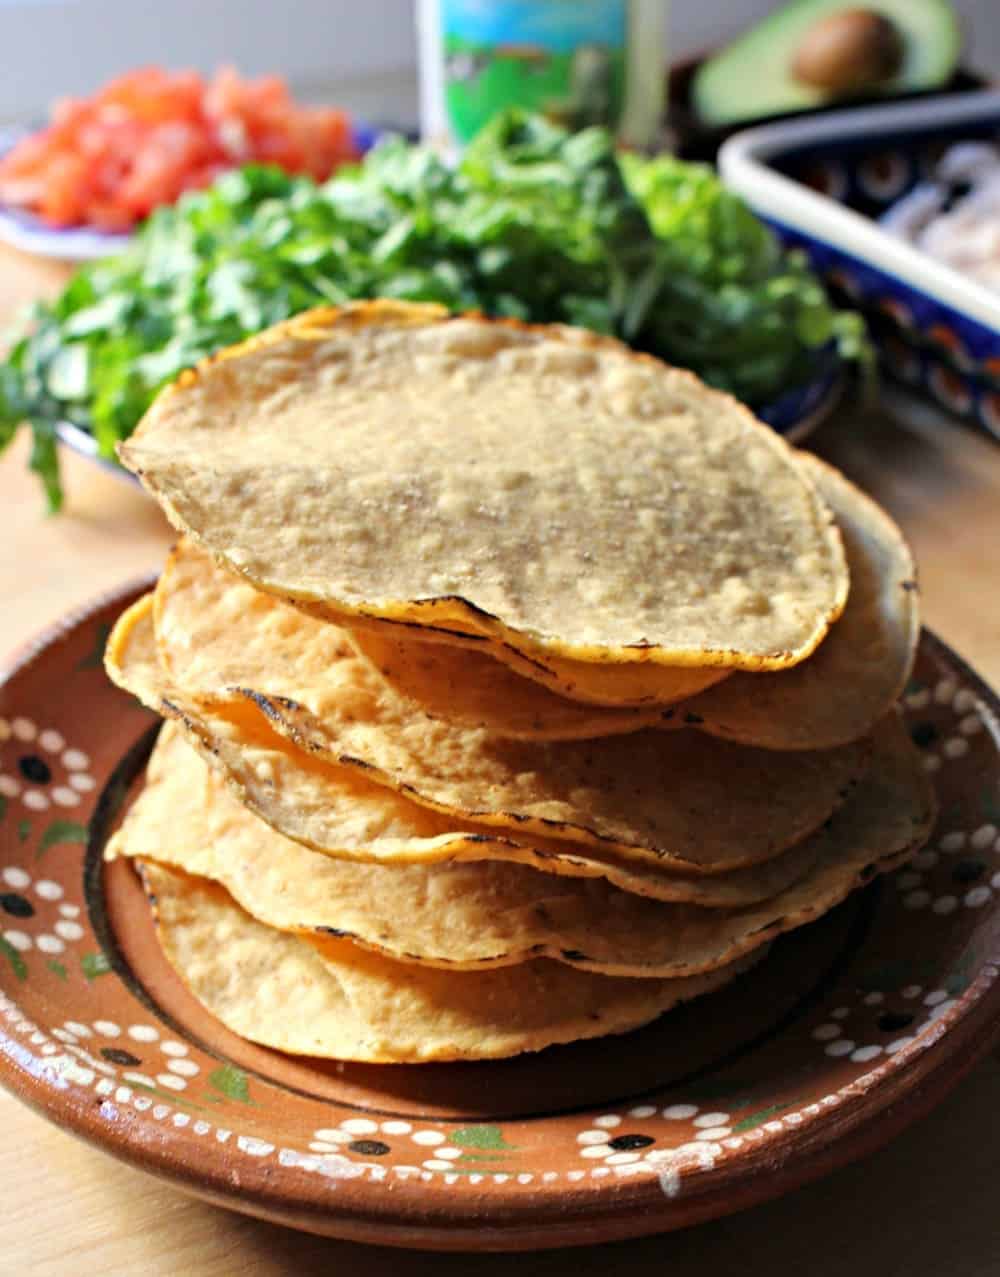 A large stack of tostadas on a decorative Mexican clay plate.